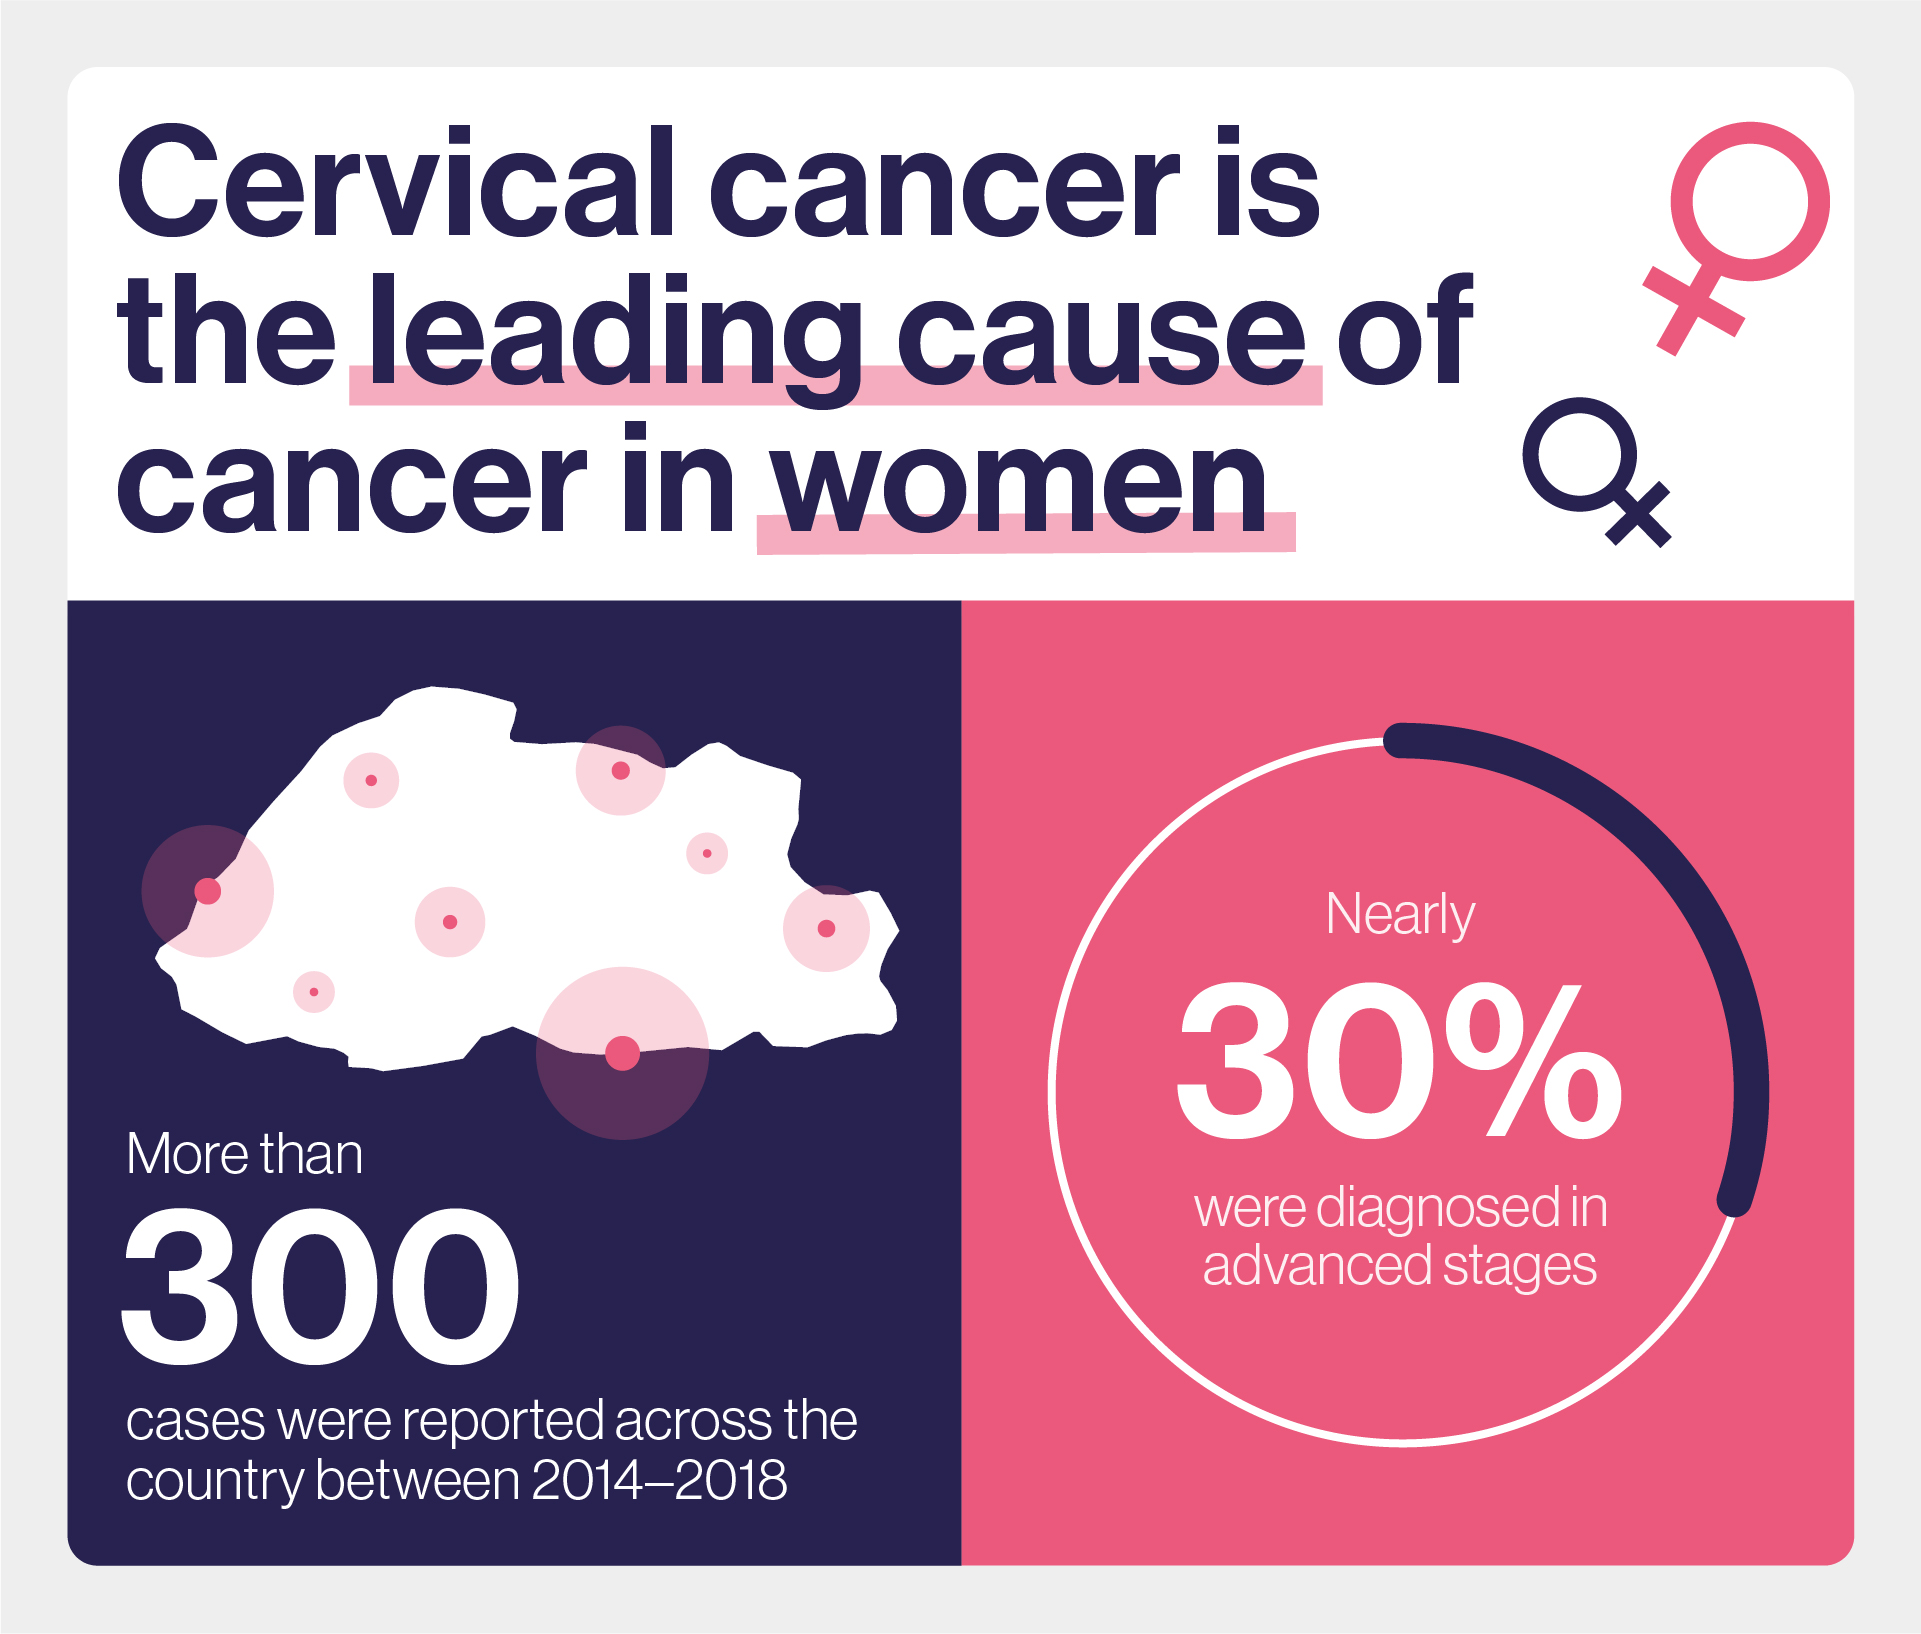 Cervical cancer is the leading cause of cancer in women